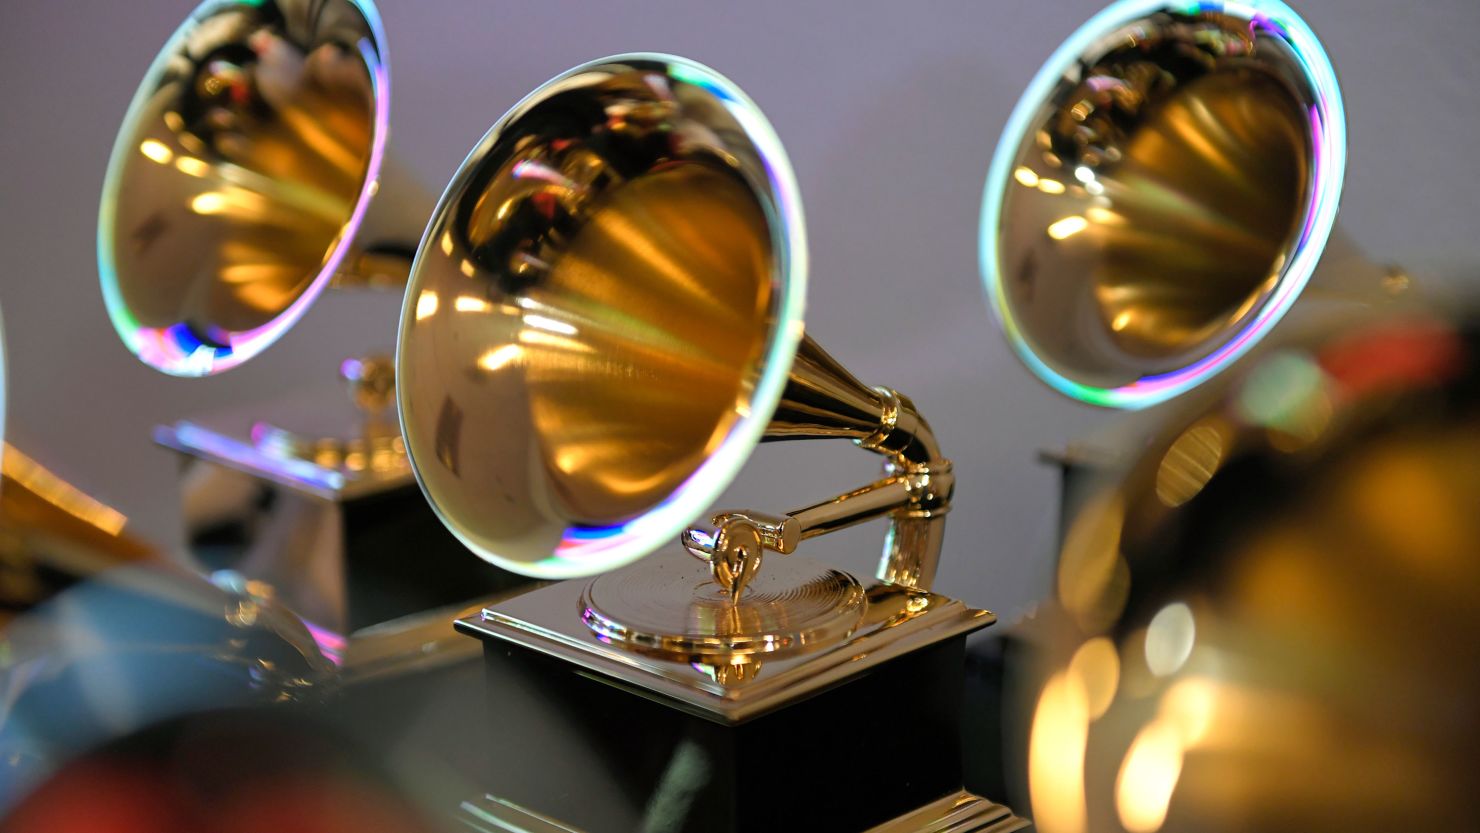 The Grammy Awards will be presented on Sunday.